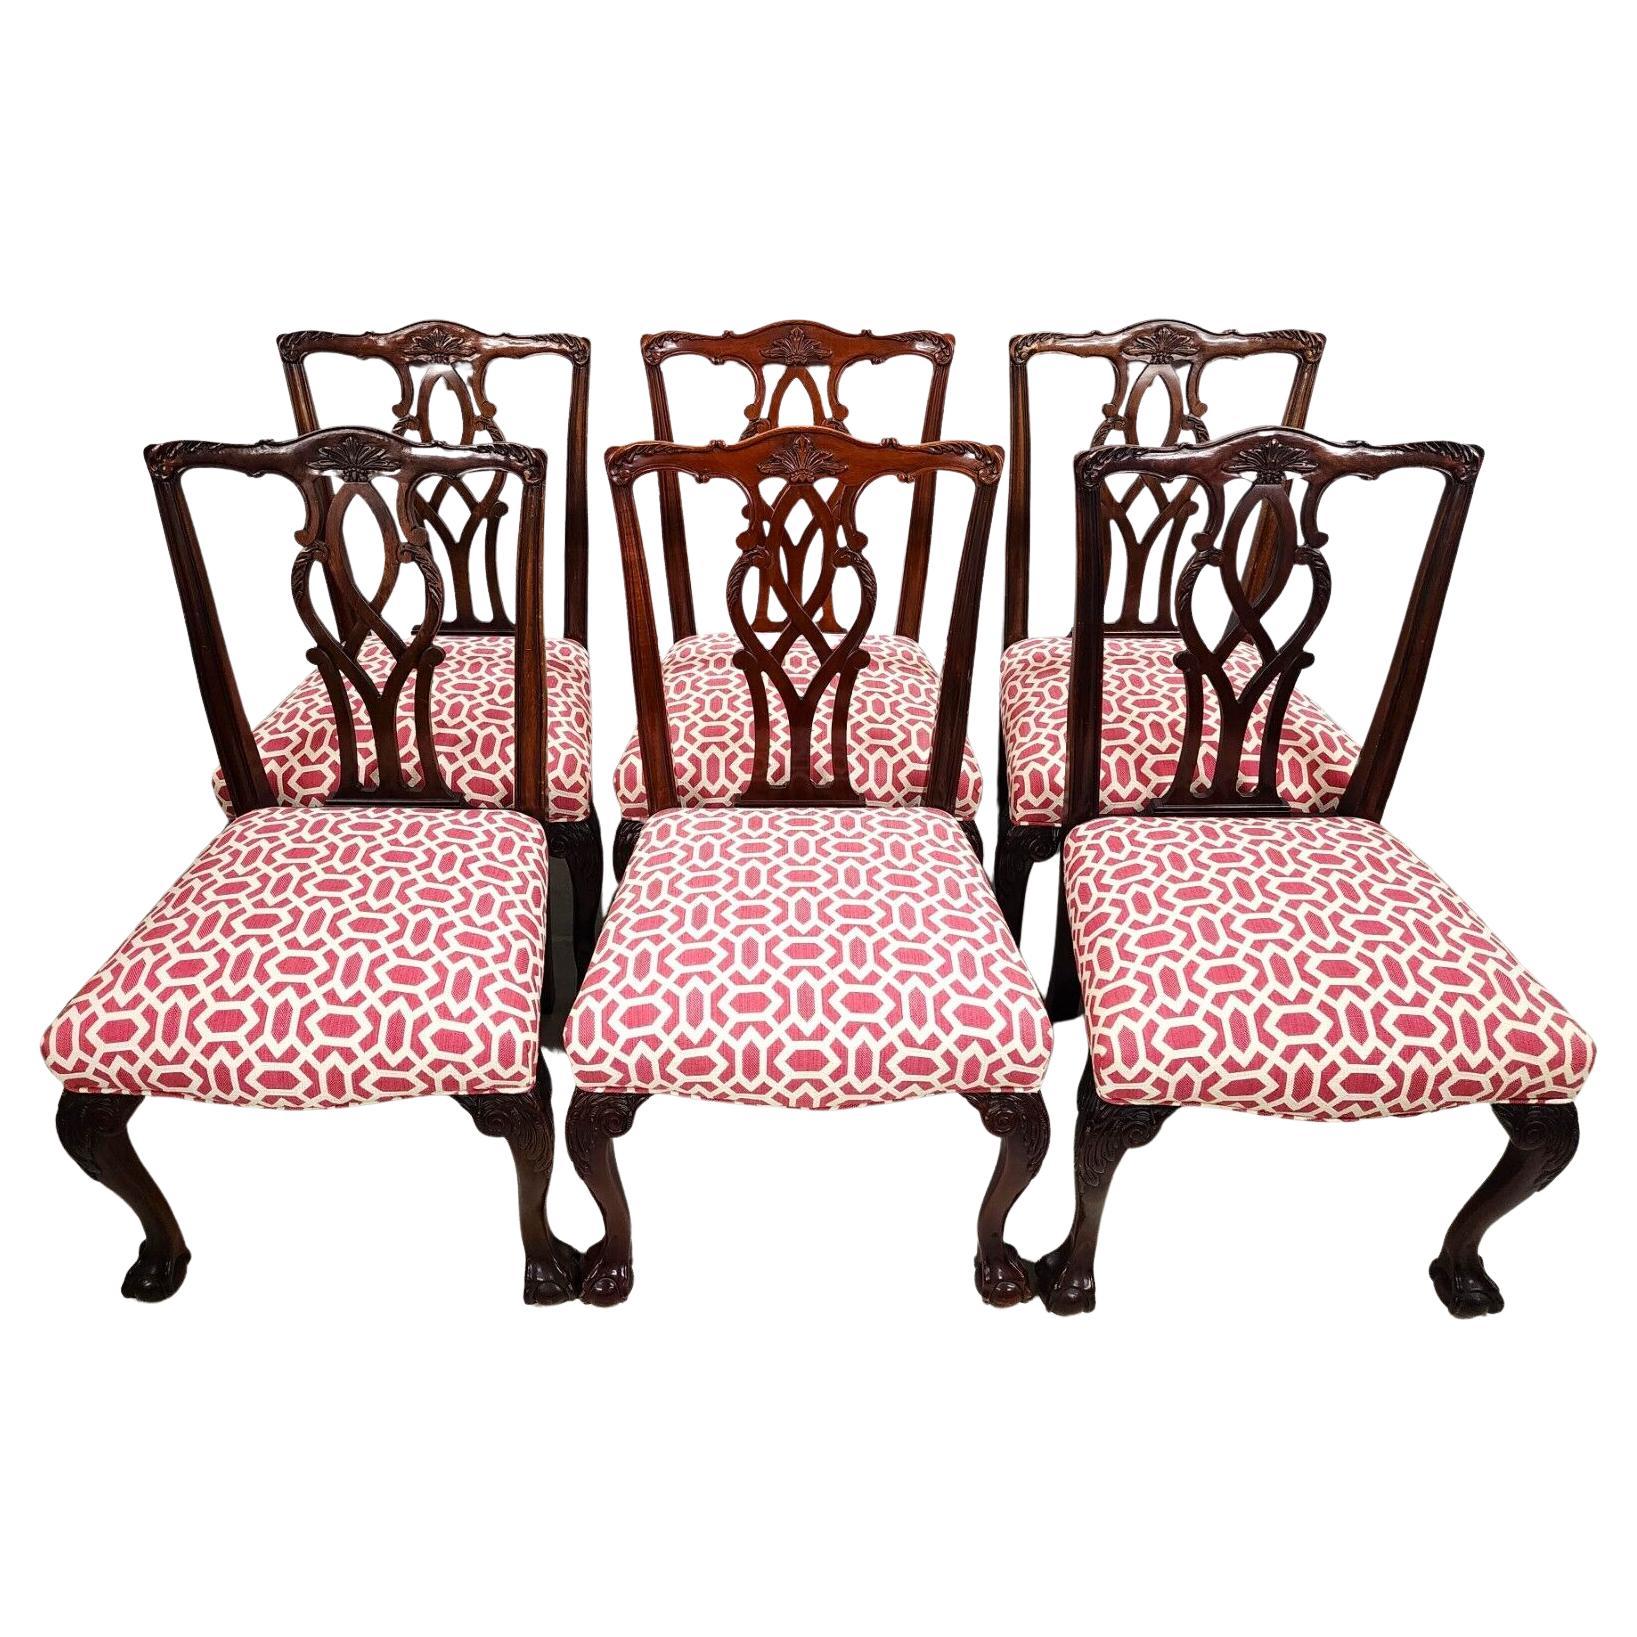 Kindel Chippendale Ball & Claw Dining Chairs 